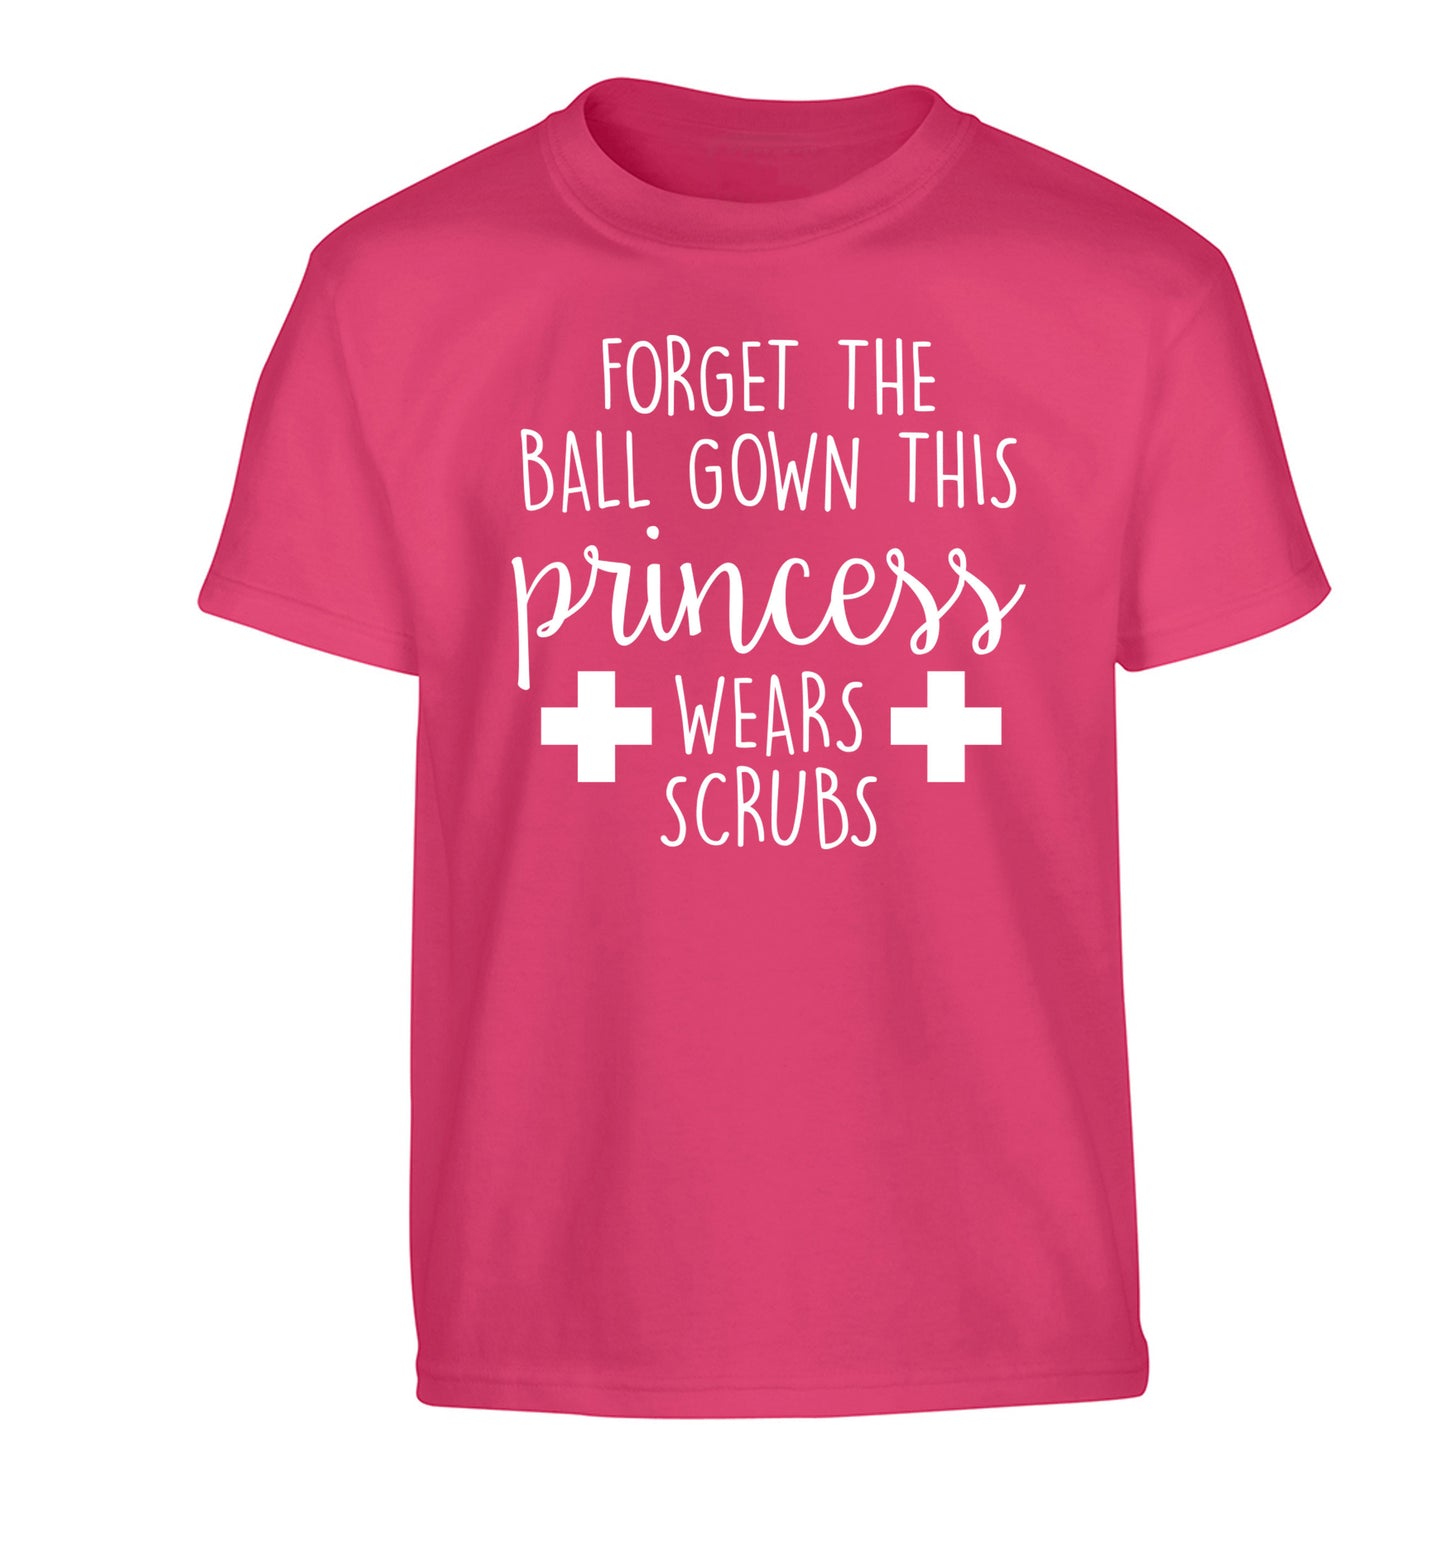 Forget the ball gown this princess wears scrubs Children's pink Tshirt 12-14 Years